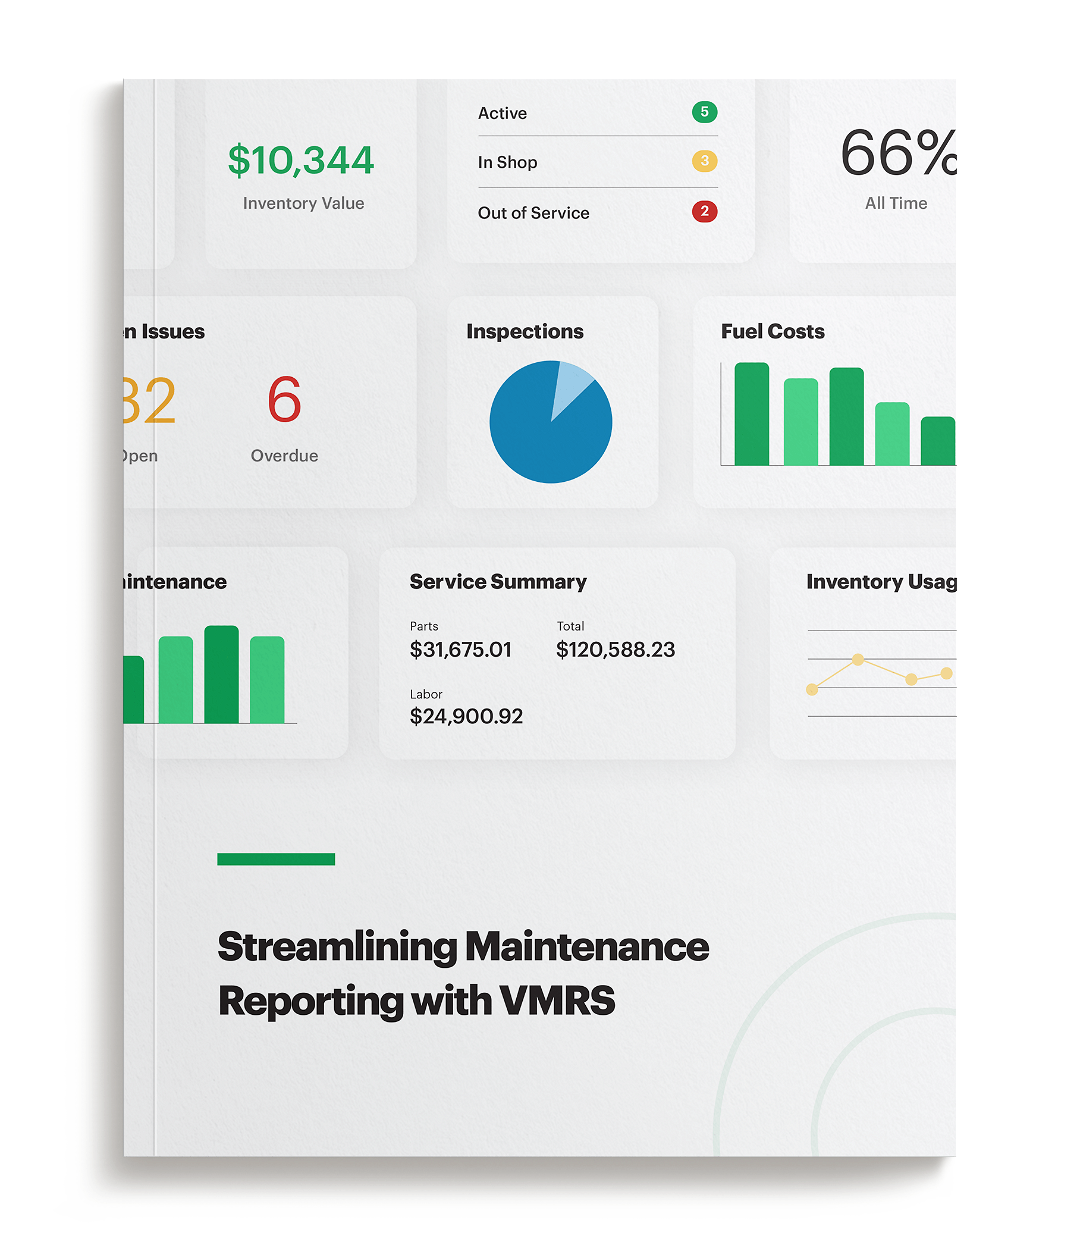 Streamlining Maintenance Reporting with VMRS